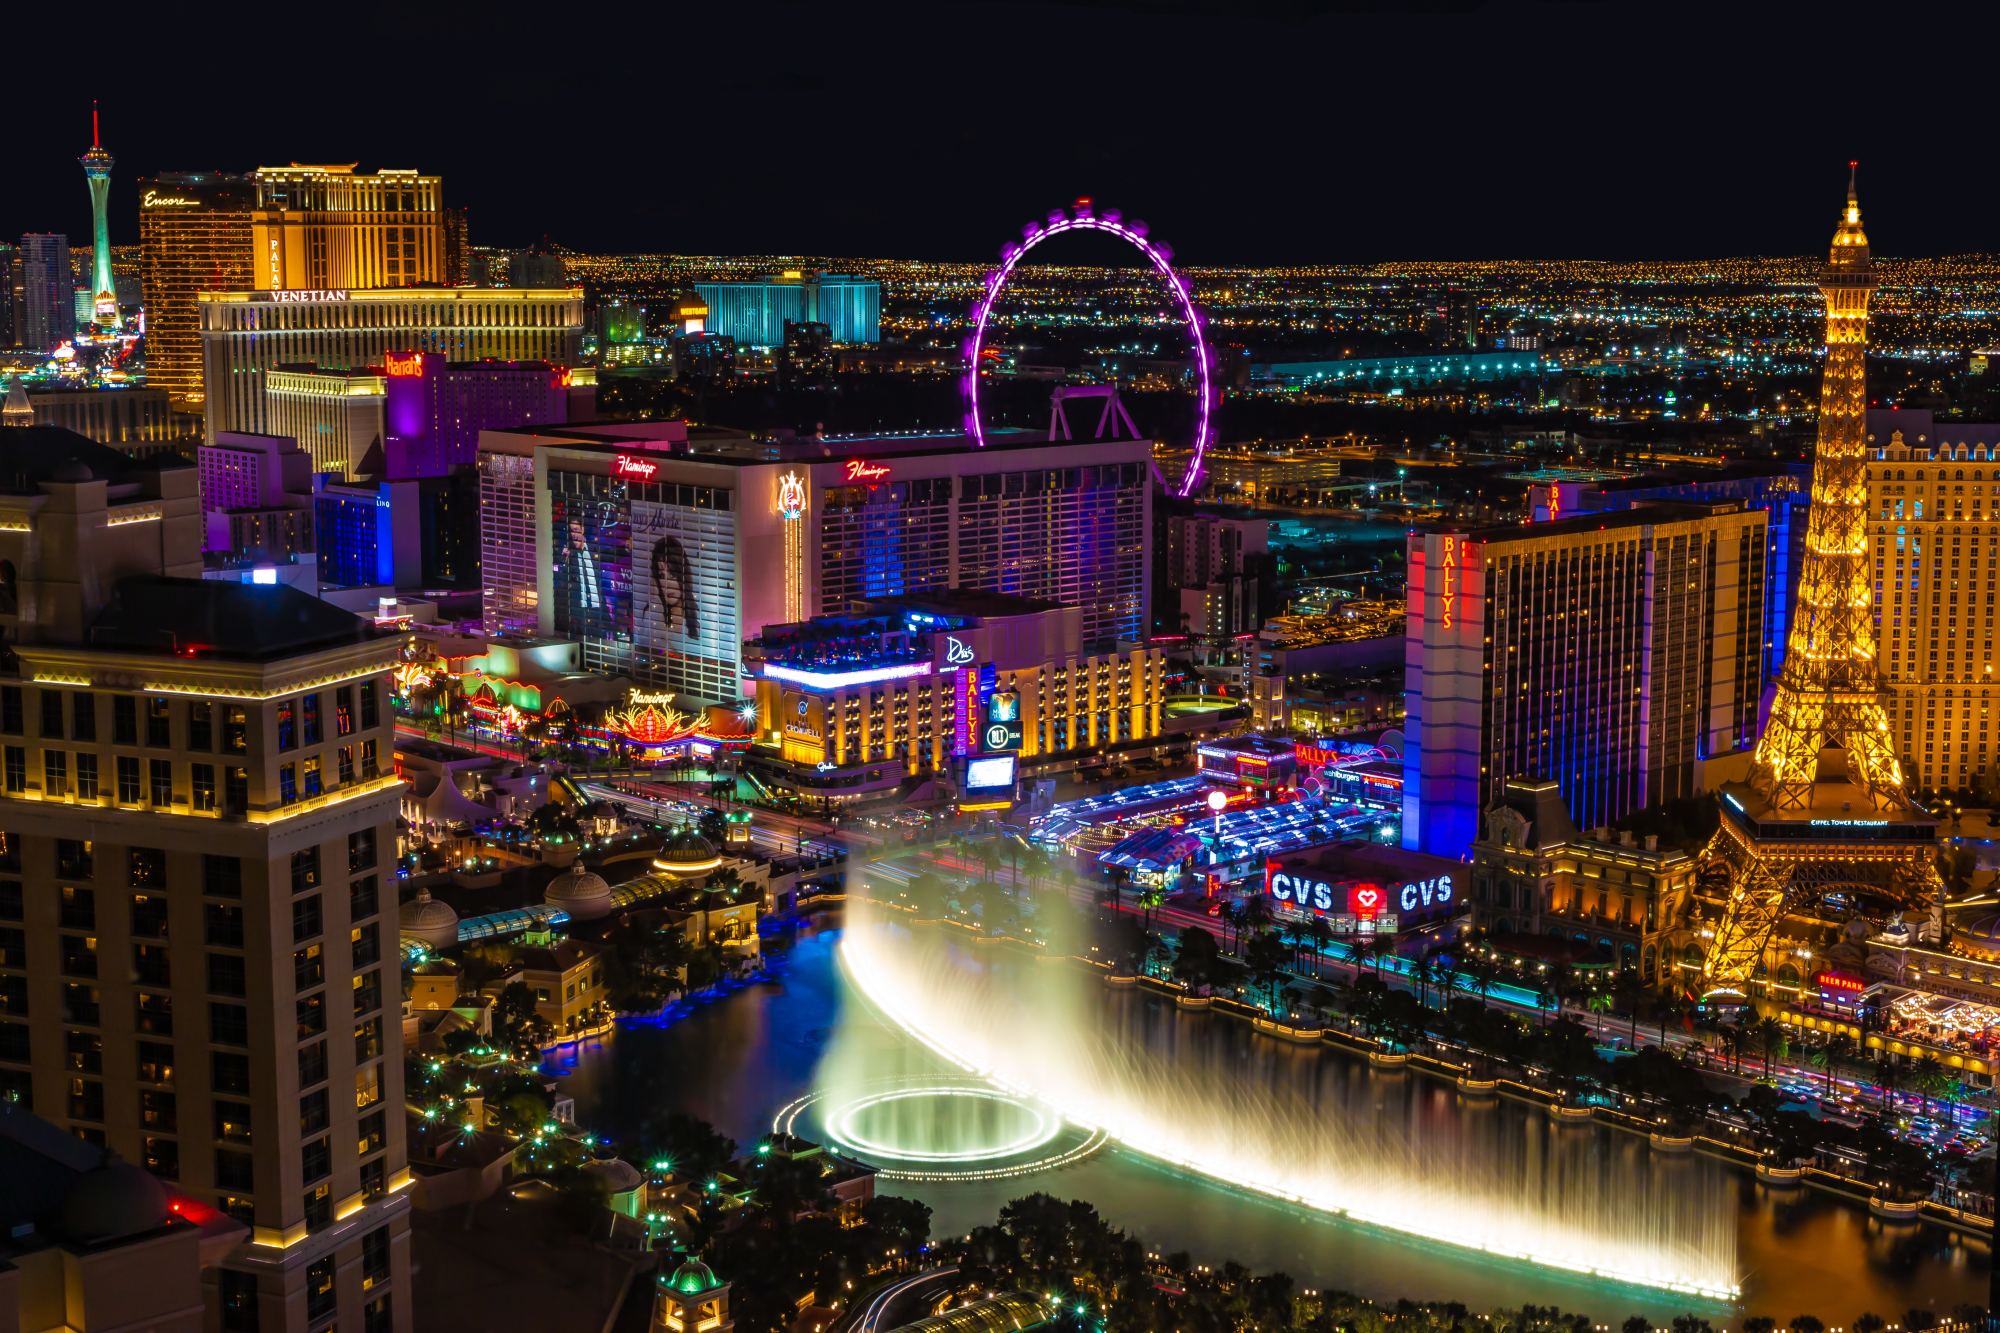 Las Vegas Travel Guide: Things to Do, Where to Stay